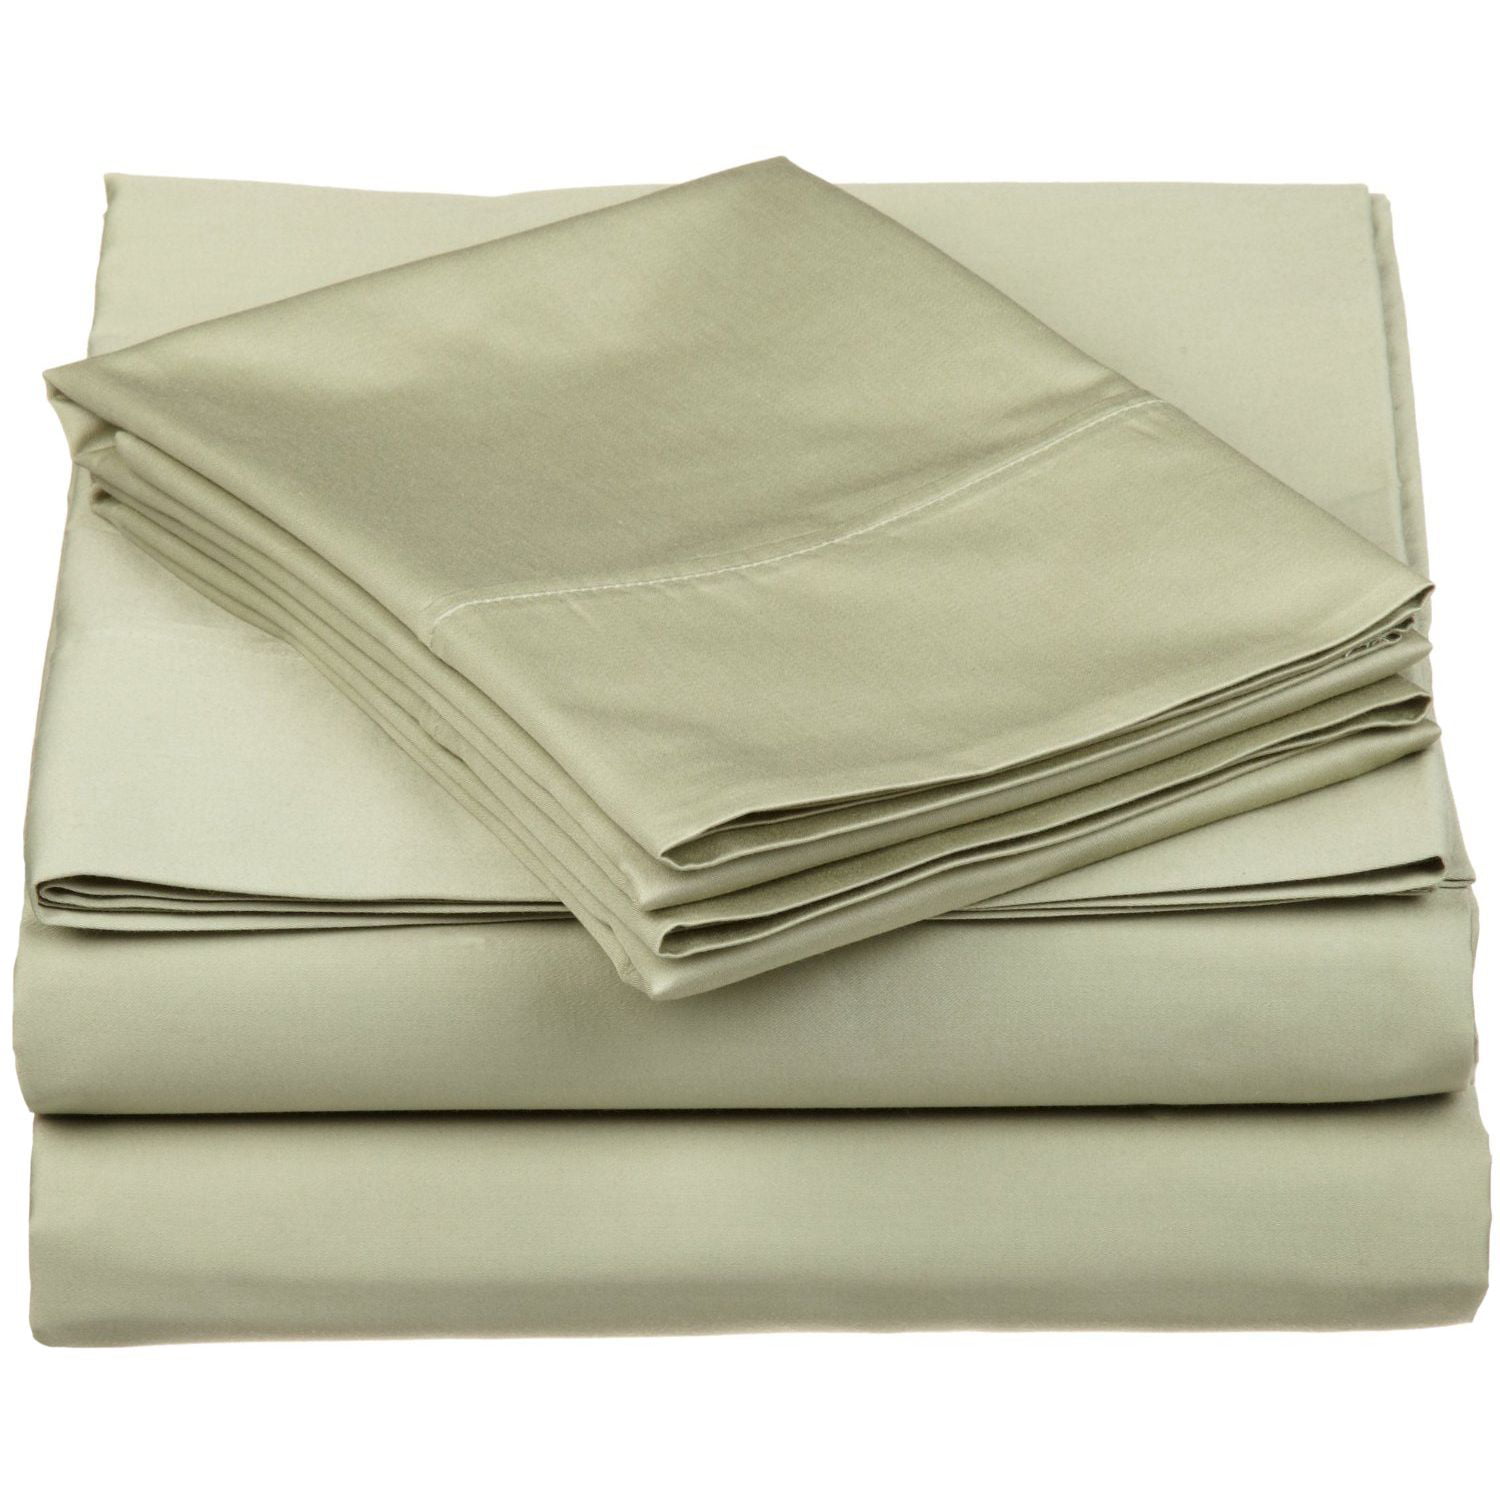 Details about   600-Thread-Count Best 4 PC Sheet Set 100% Egyptian Cotton Fits Chocolate Solid 